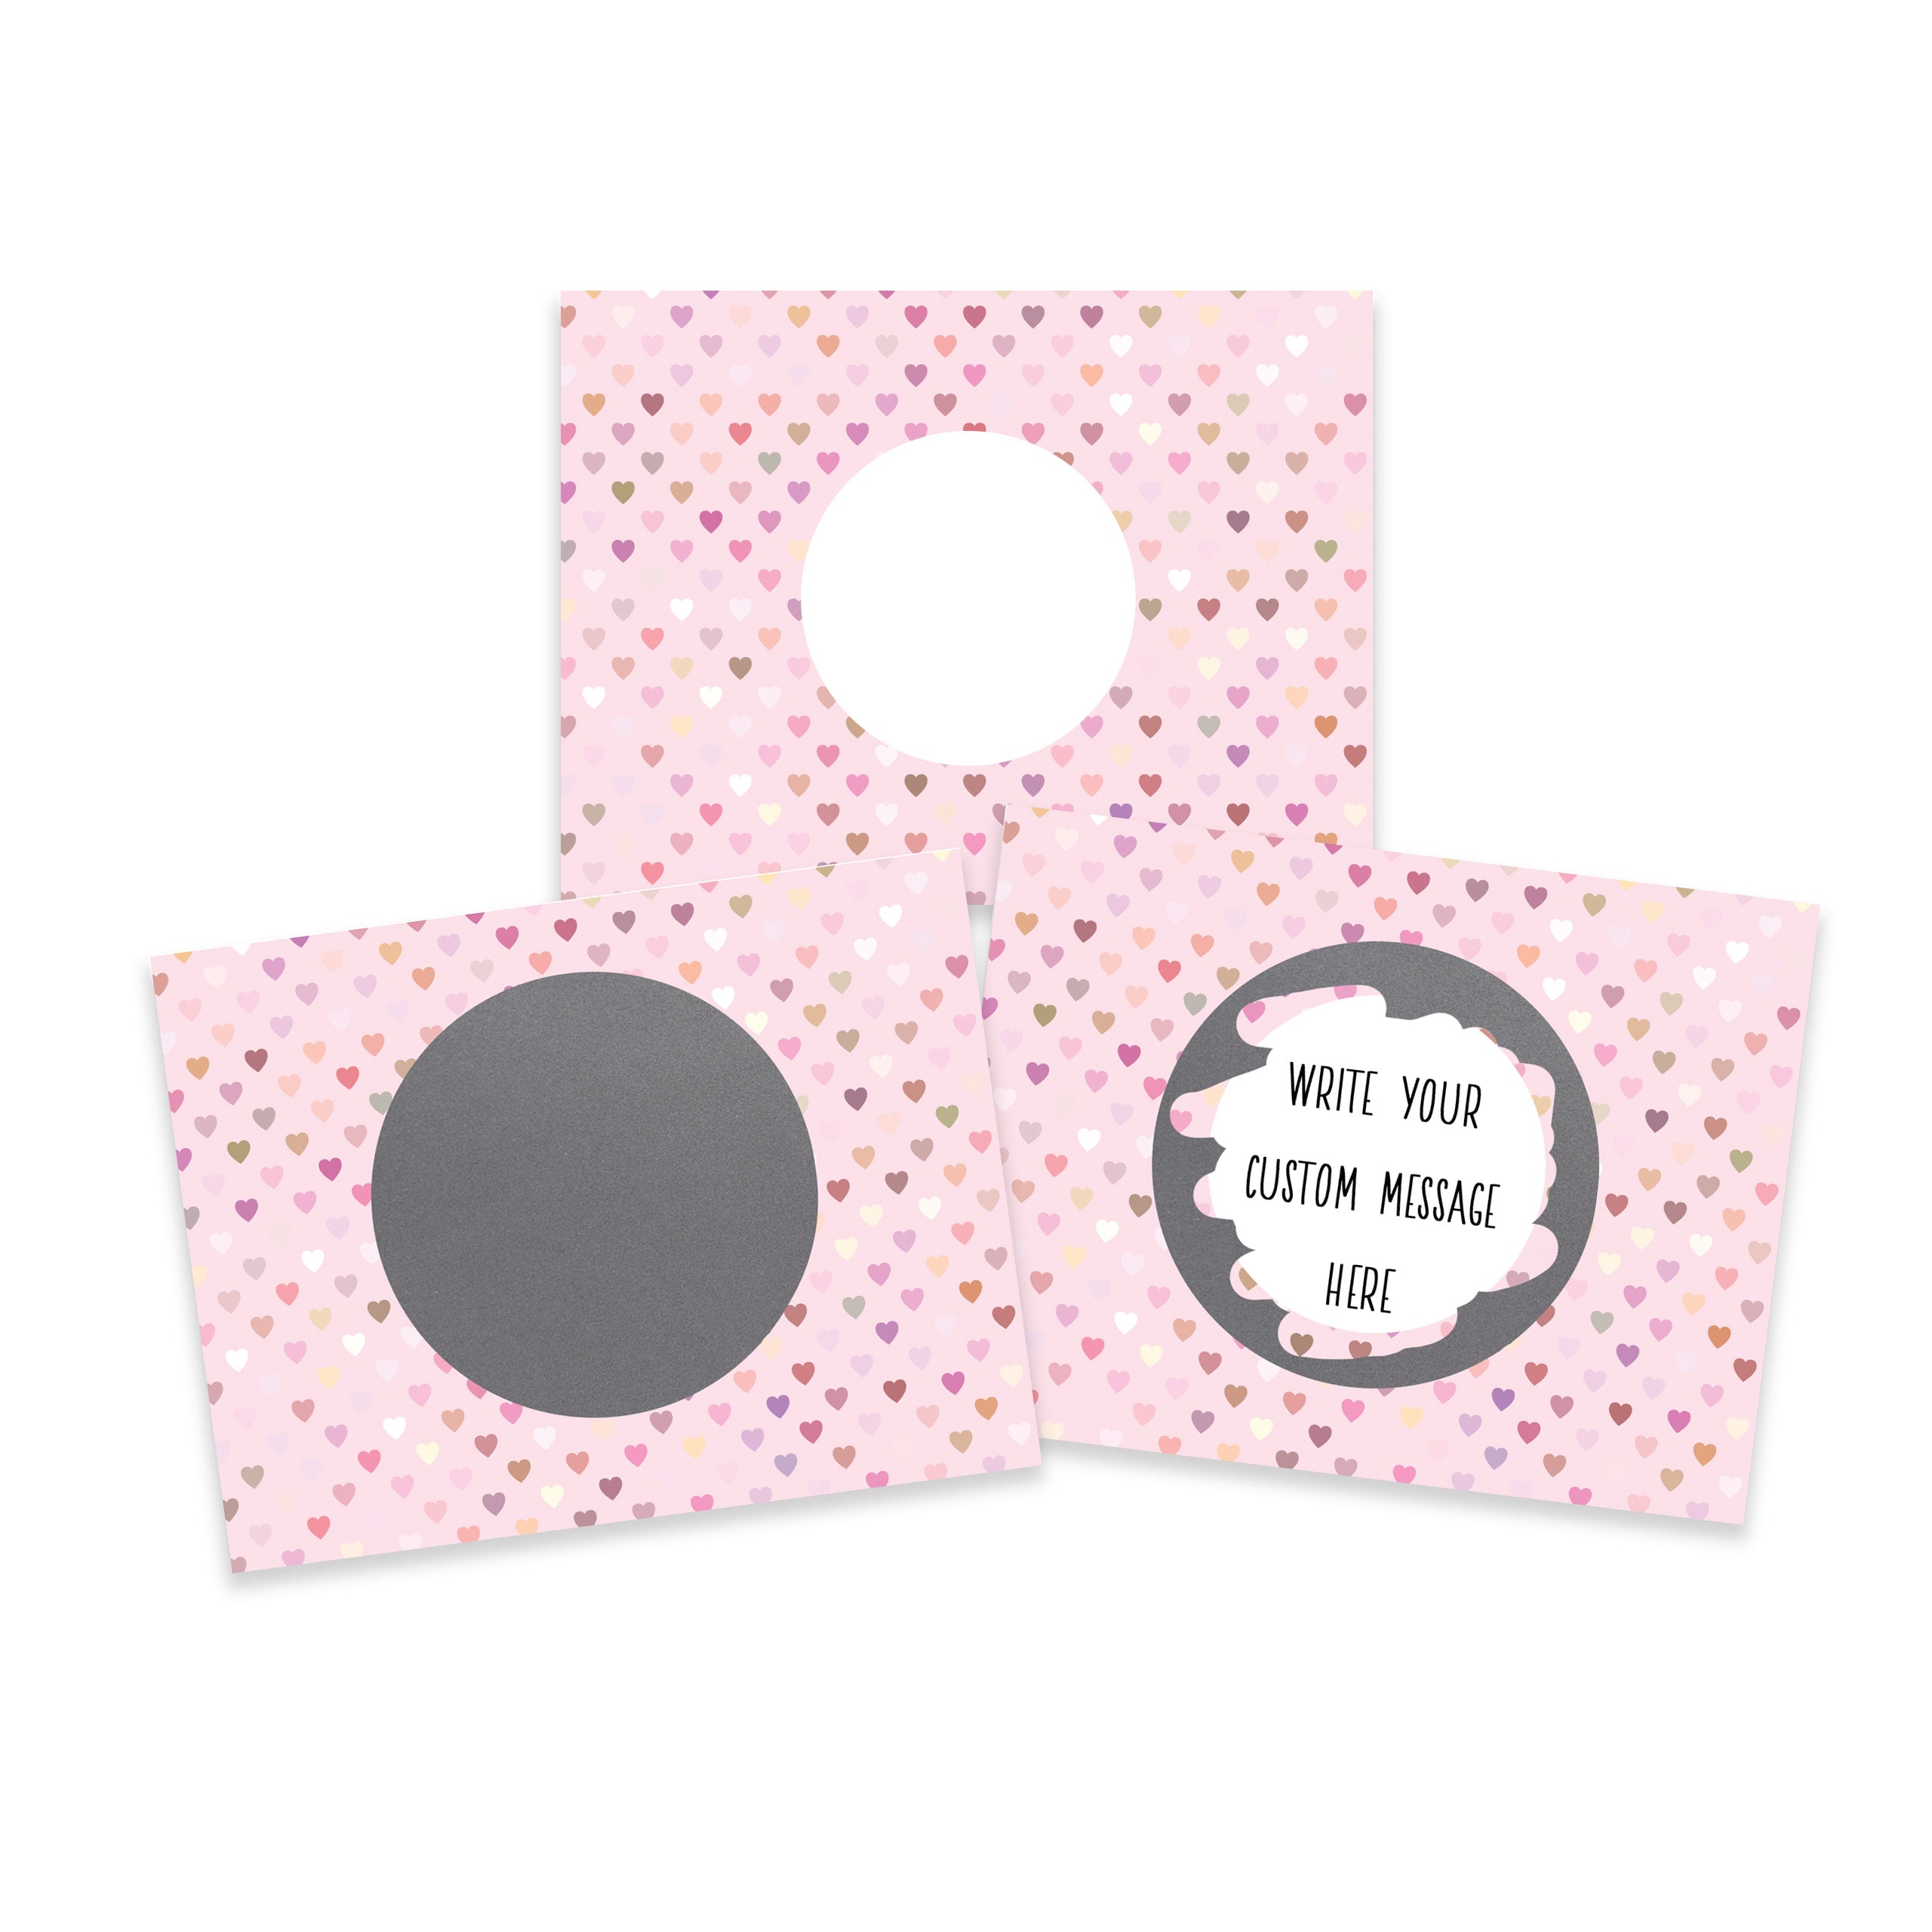 DIY Make Your Own Scratch Off Card Valentine's Pink Mini Heart 20 Pack